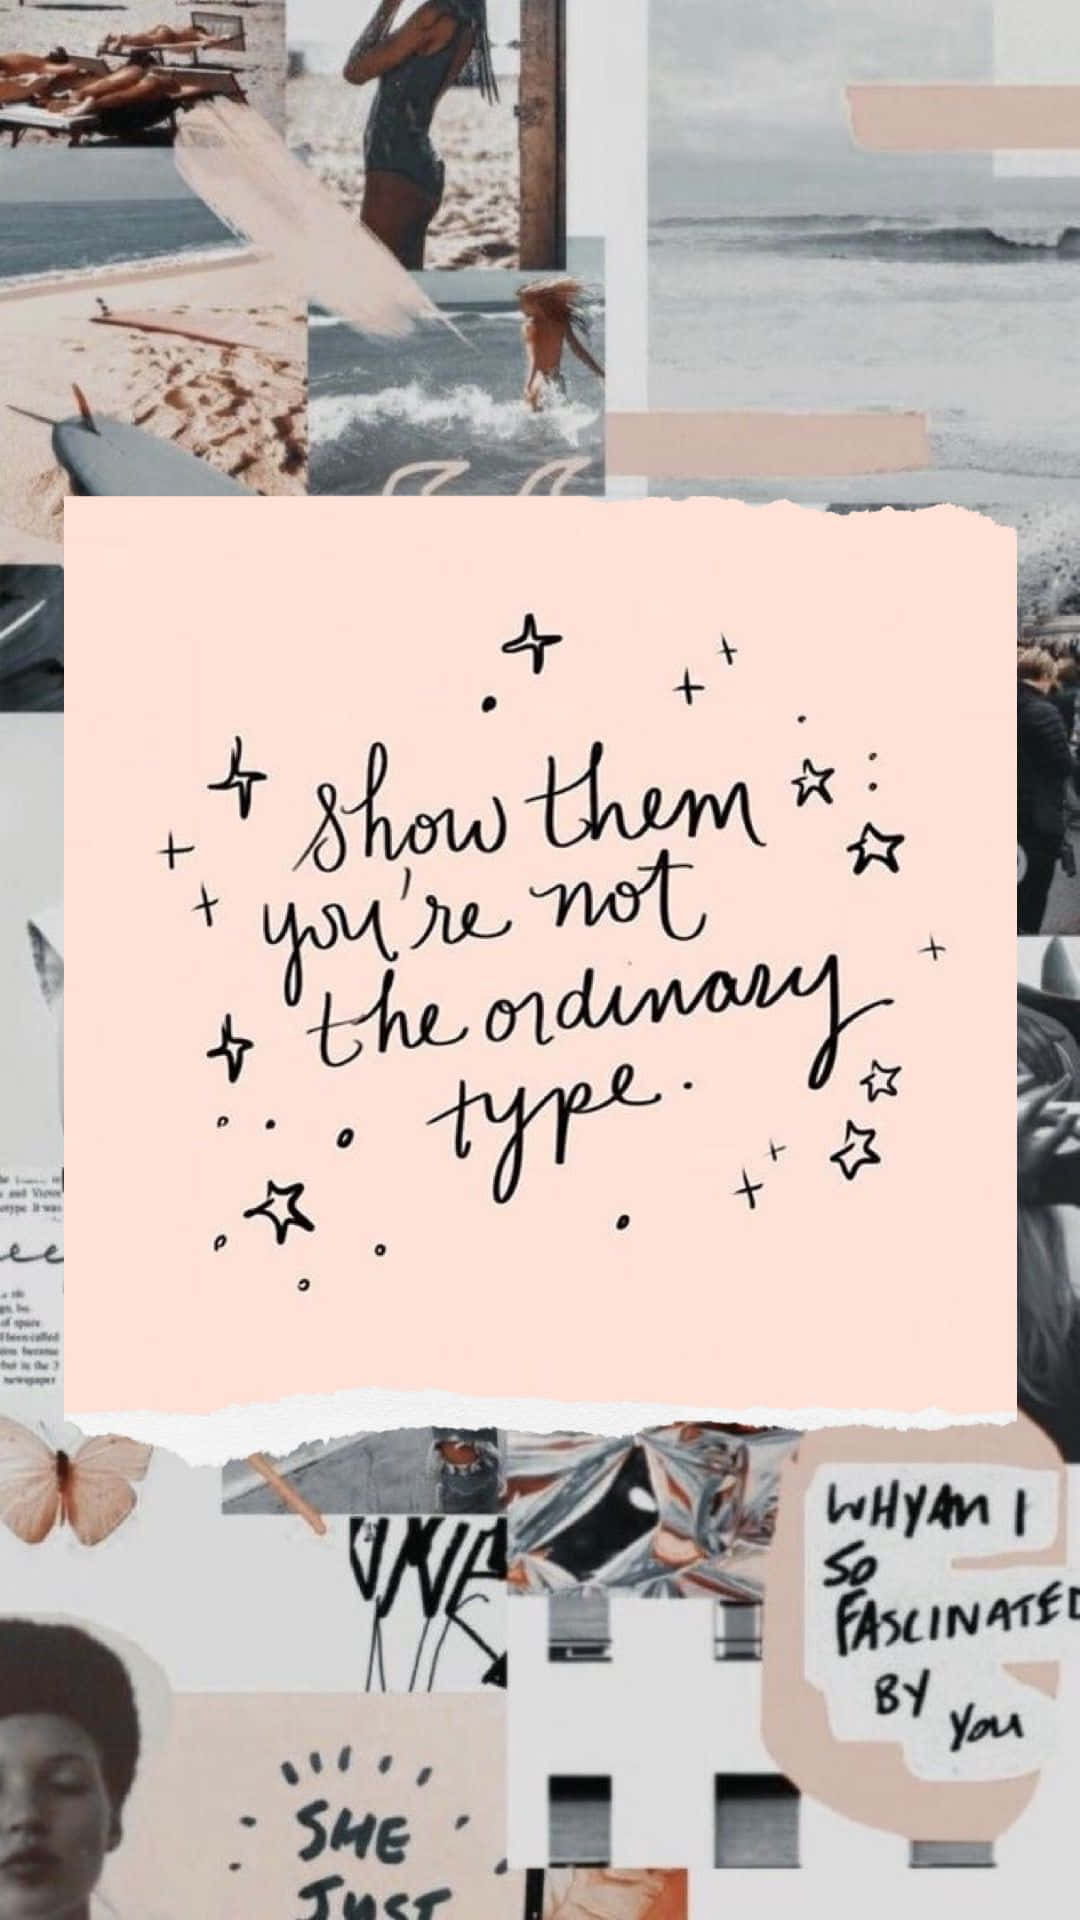 Not Ordinary Type_ Inspirational Collage.jpg Wallpaper